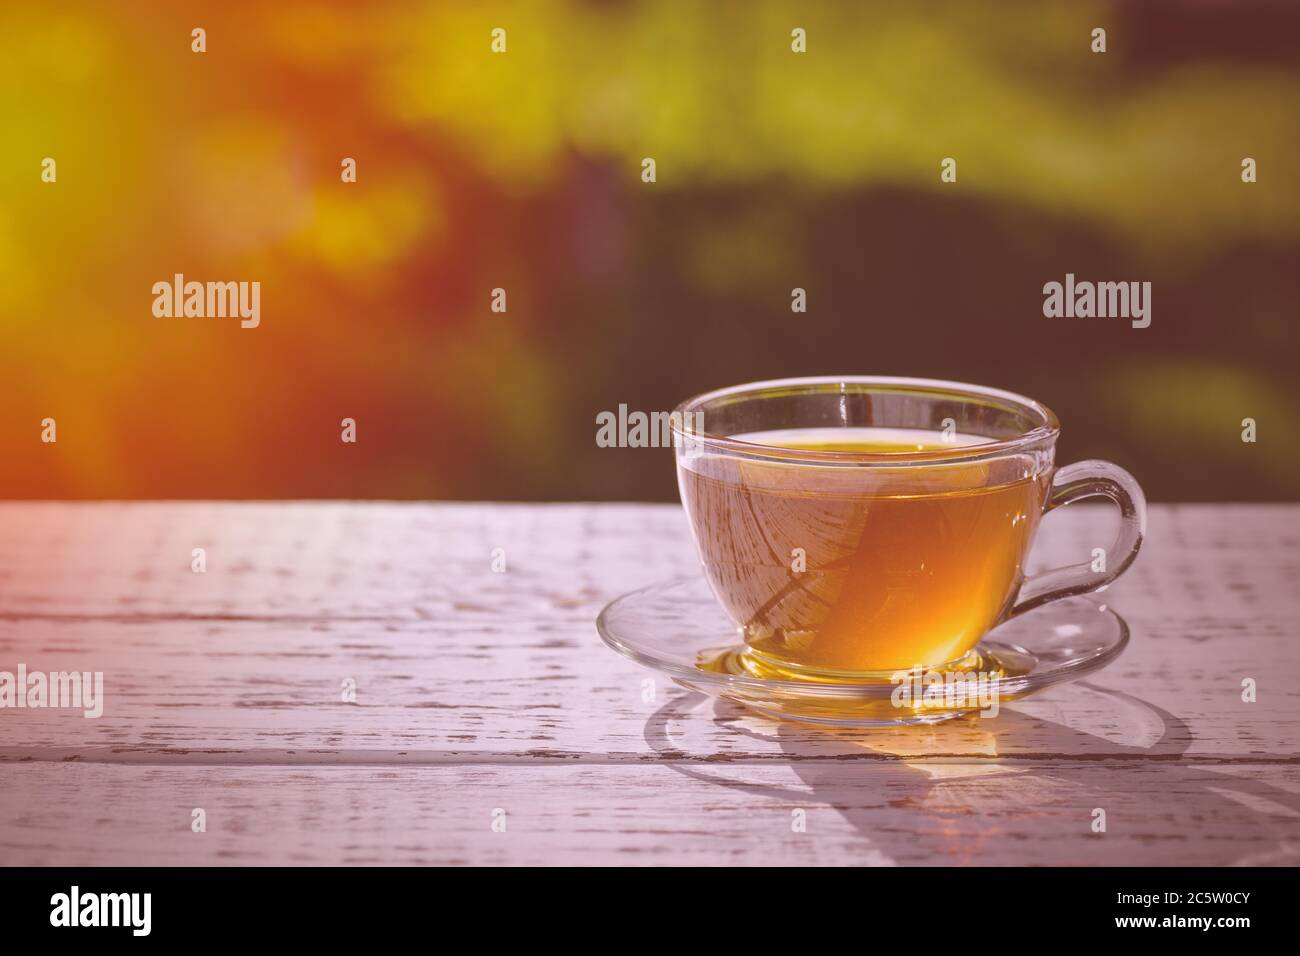 A cup of fragrant, fragrant tea, in the rays of the evening warm sunset. Stock Photo